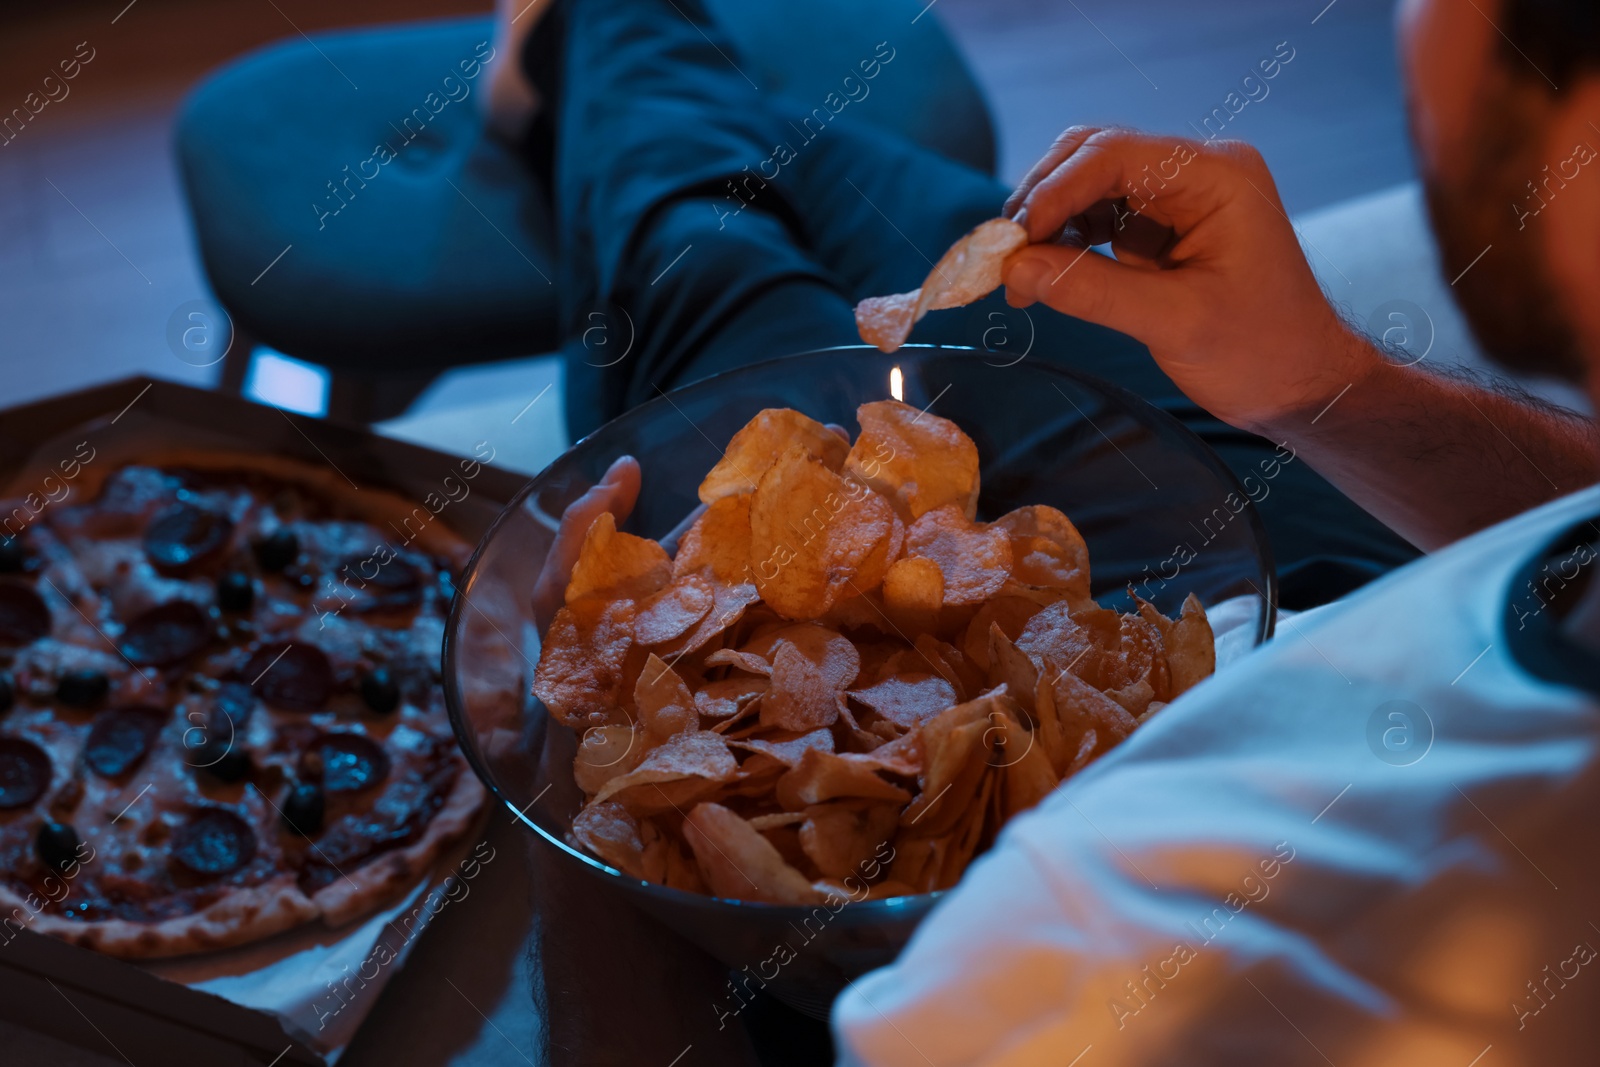 Photo of Man eating chips and pizza while watching TV on sofa at night, closeup. Bad habit